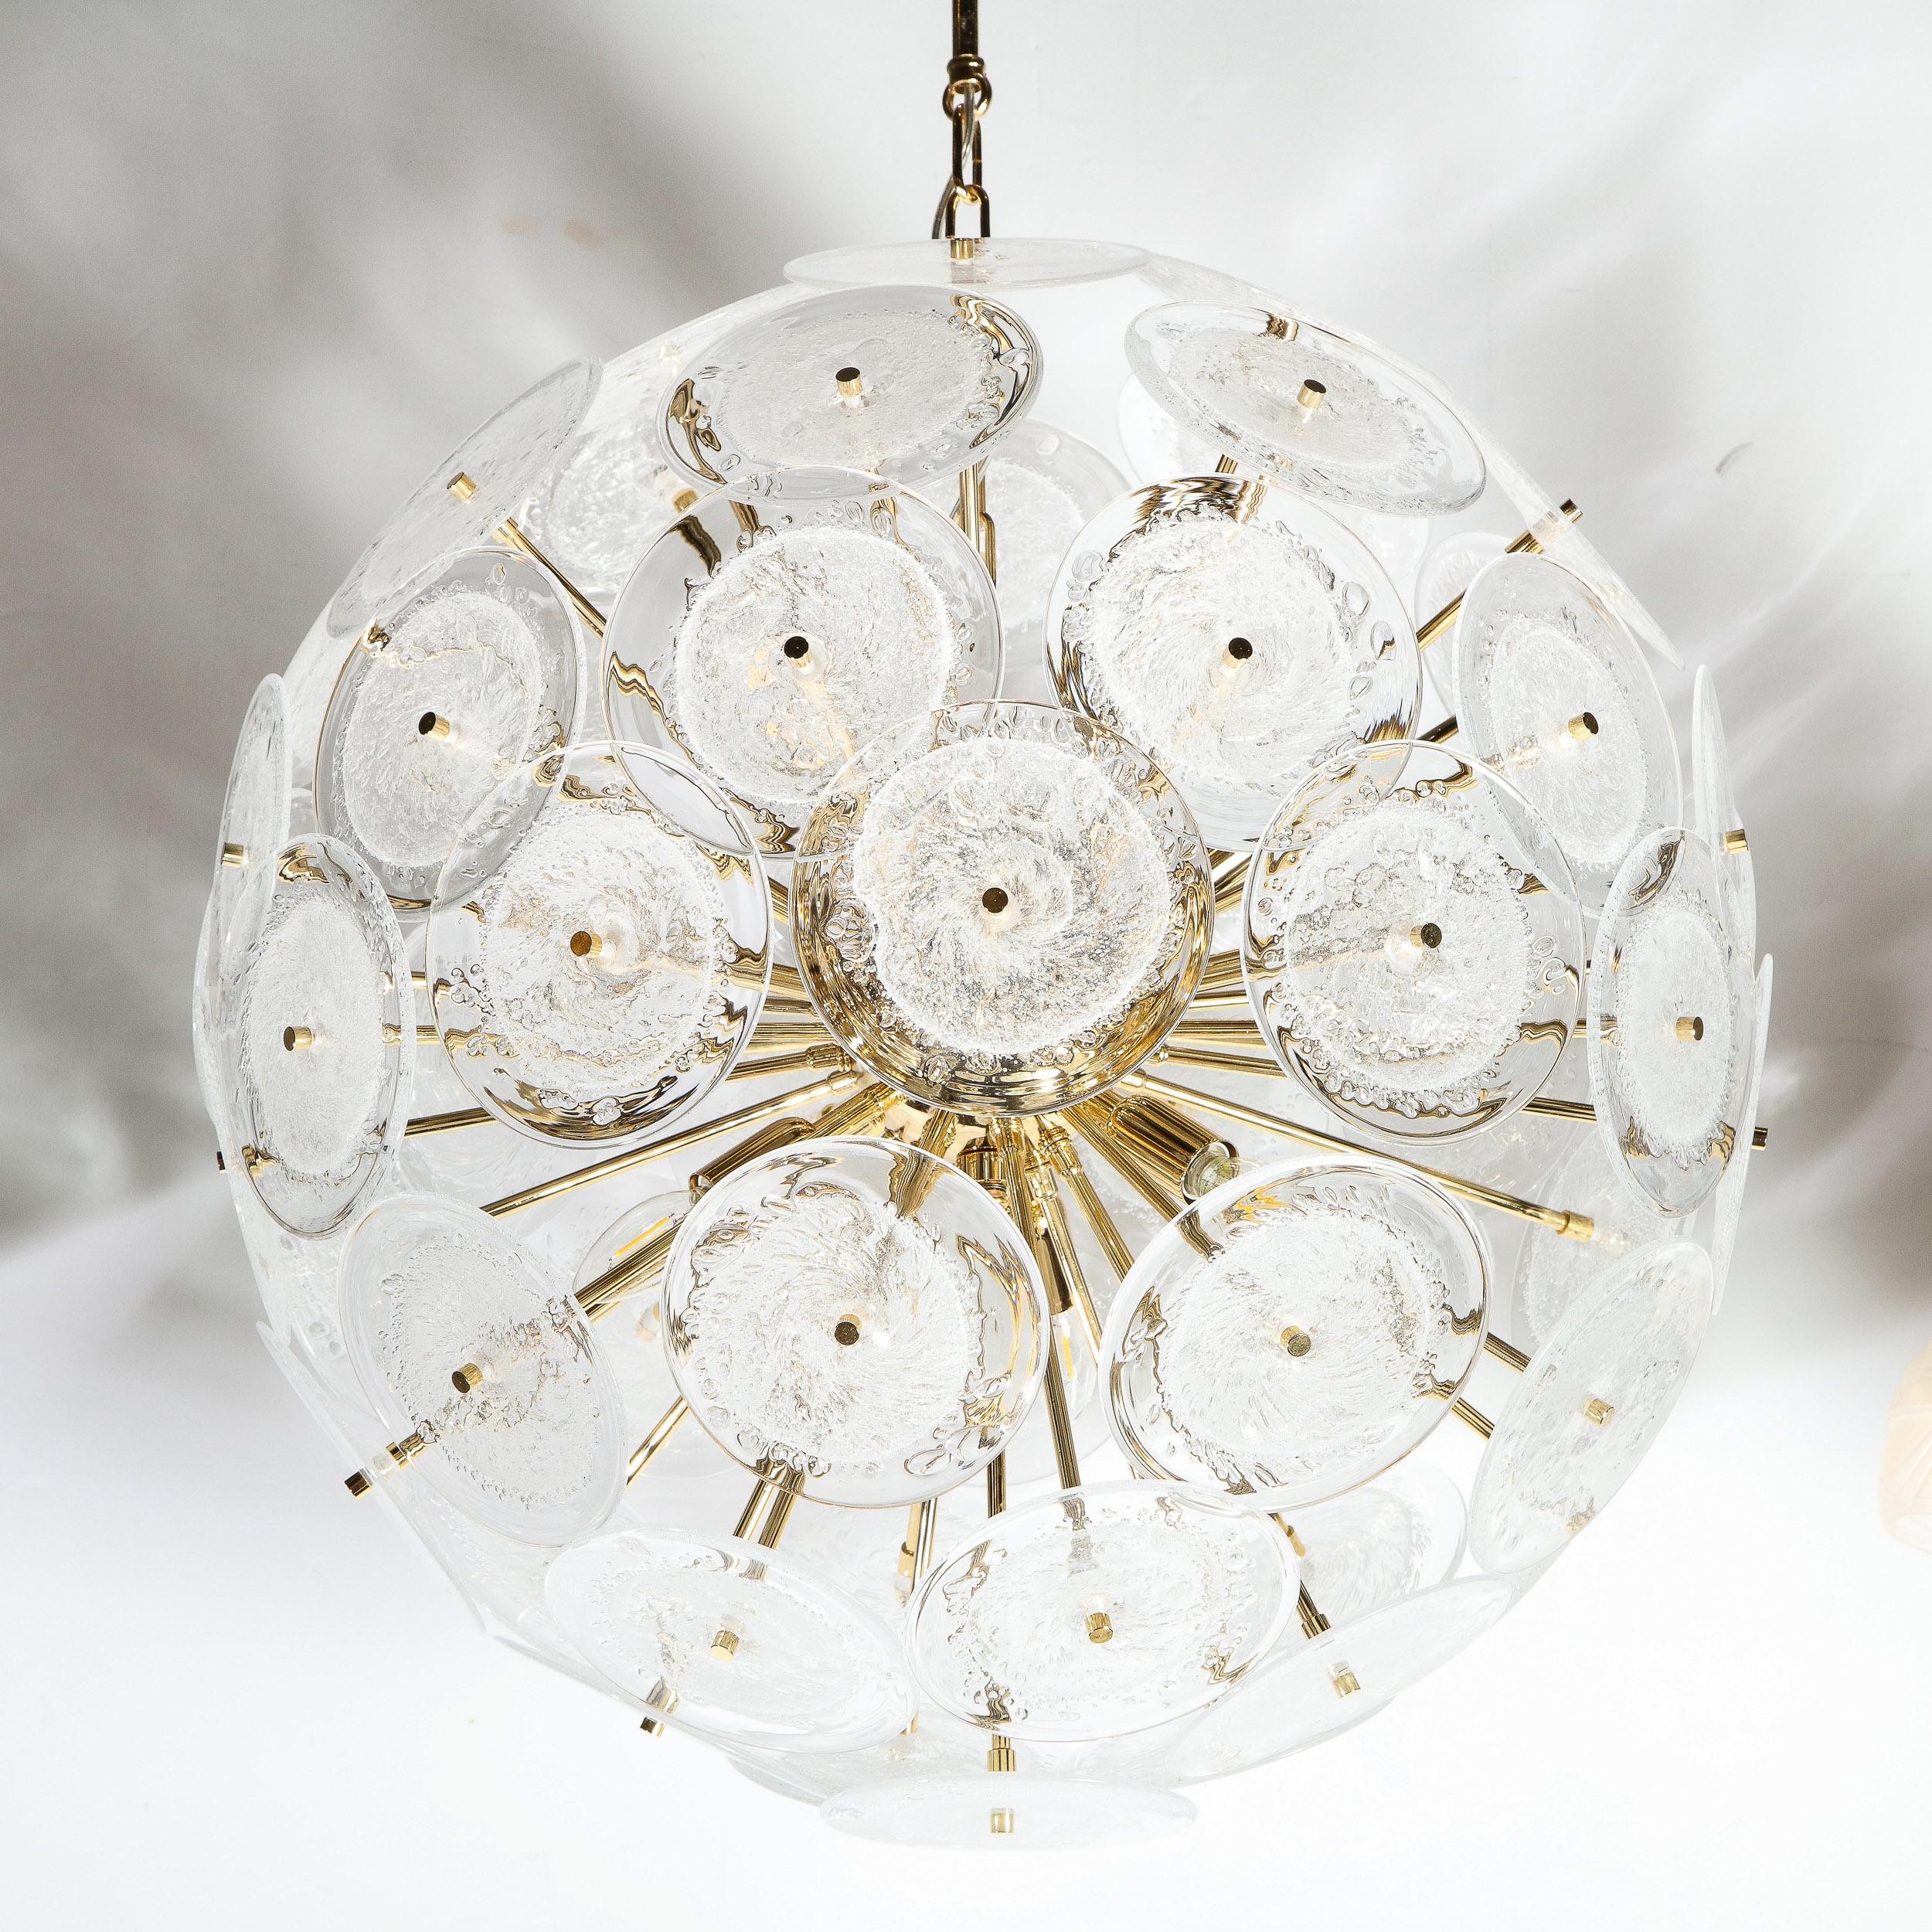 Polished Brass Sputnik Chandelier with Hand Blown Translucent Murano Glass Discs For Sale 5